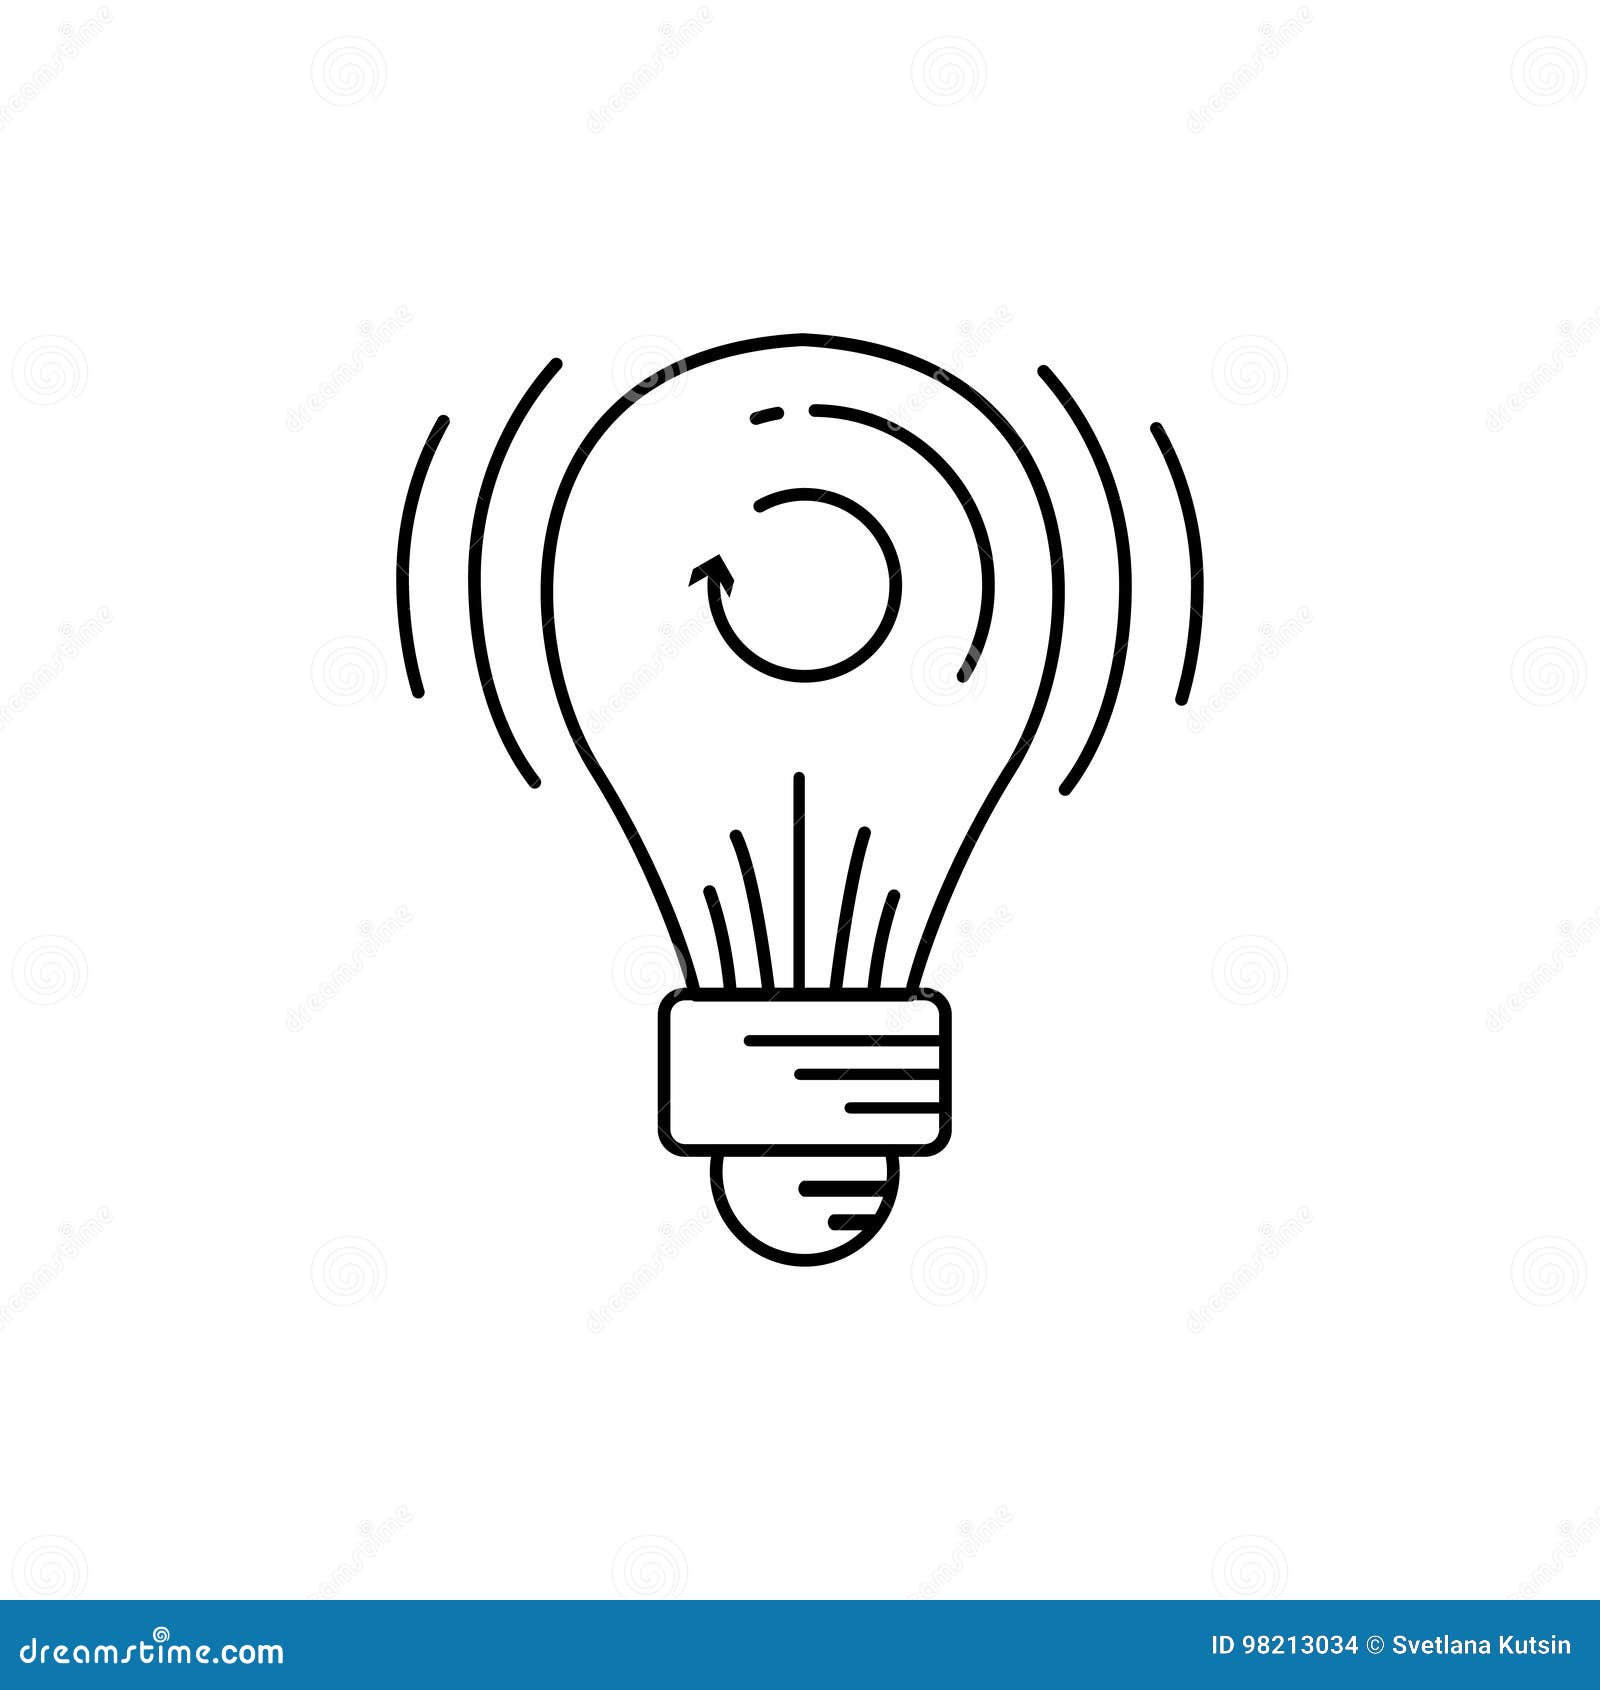 Premium Vector  A drawing of a light bulb with the word light on it.